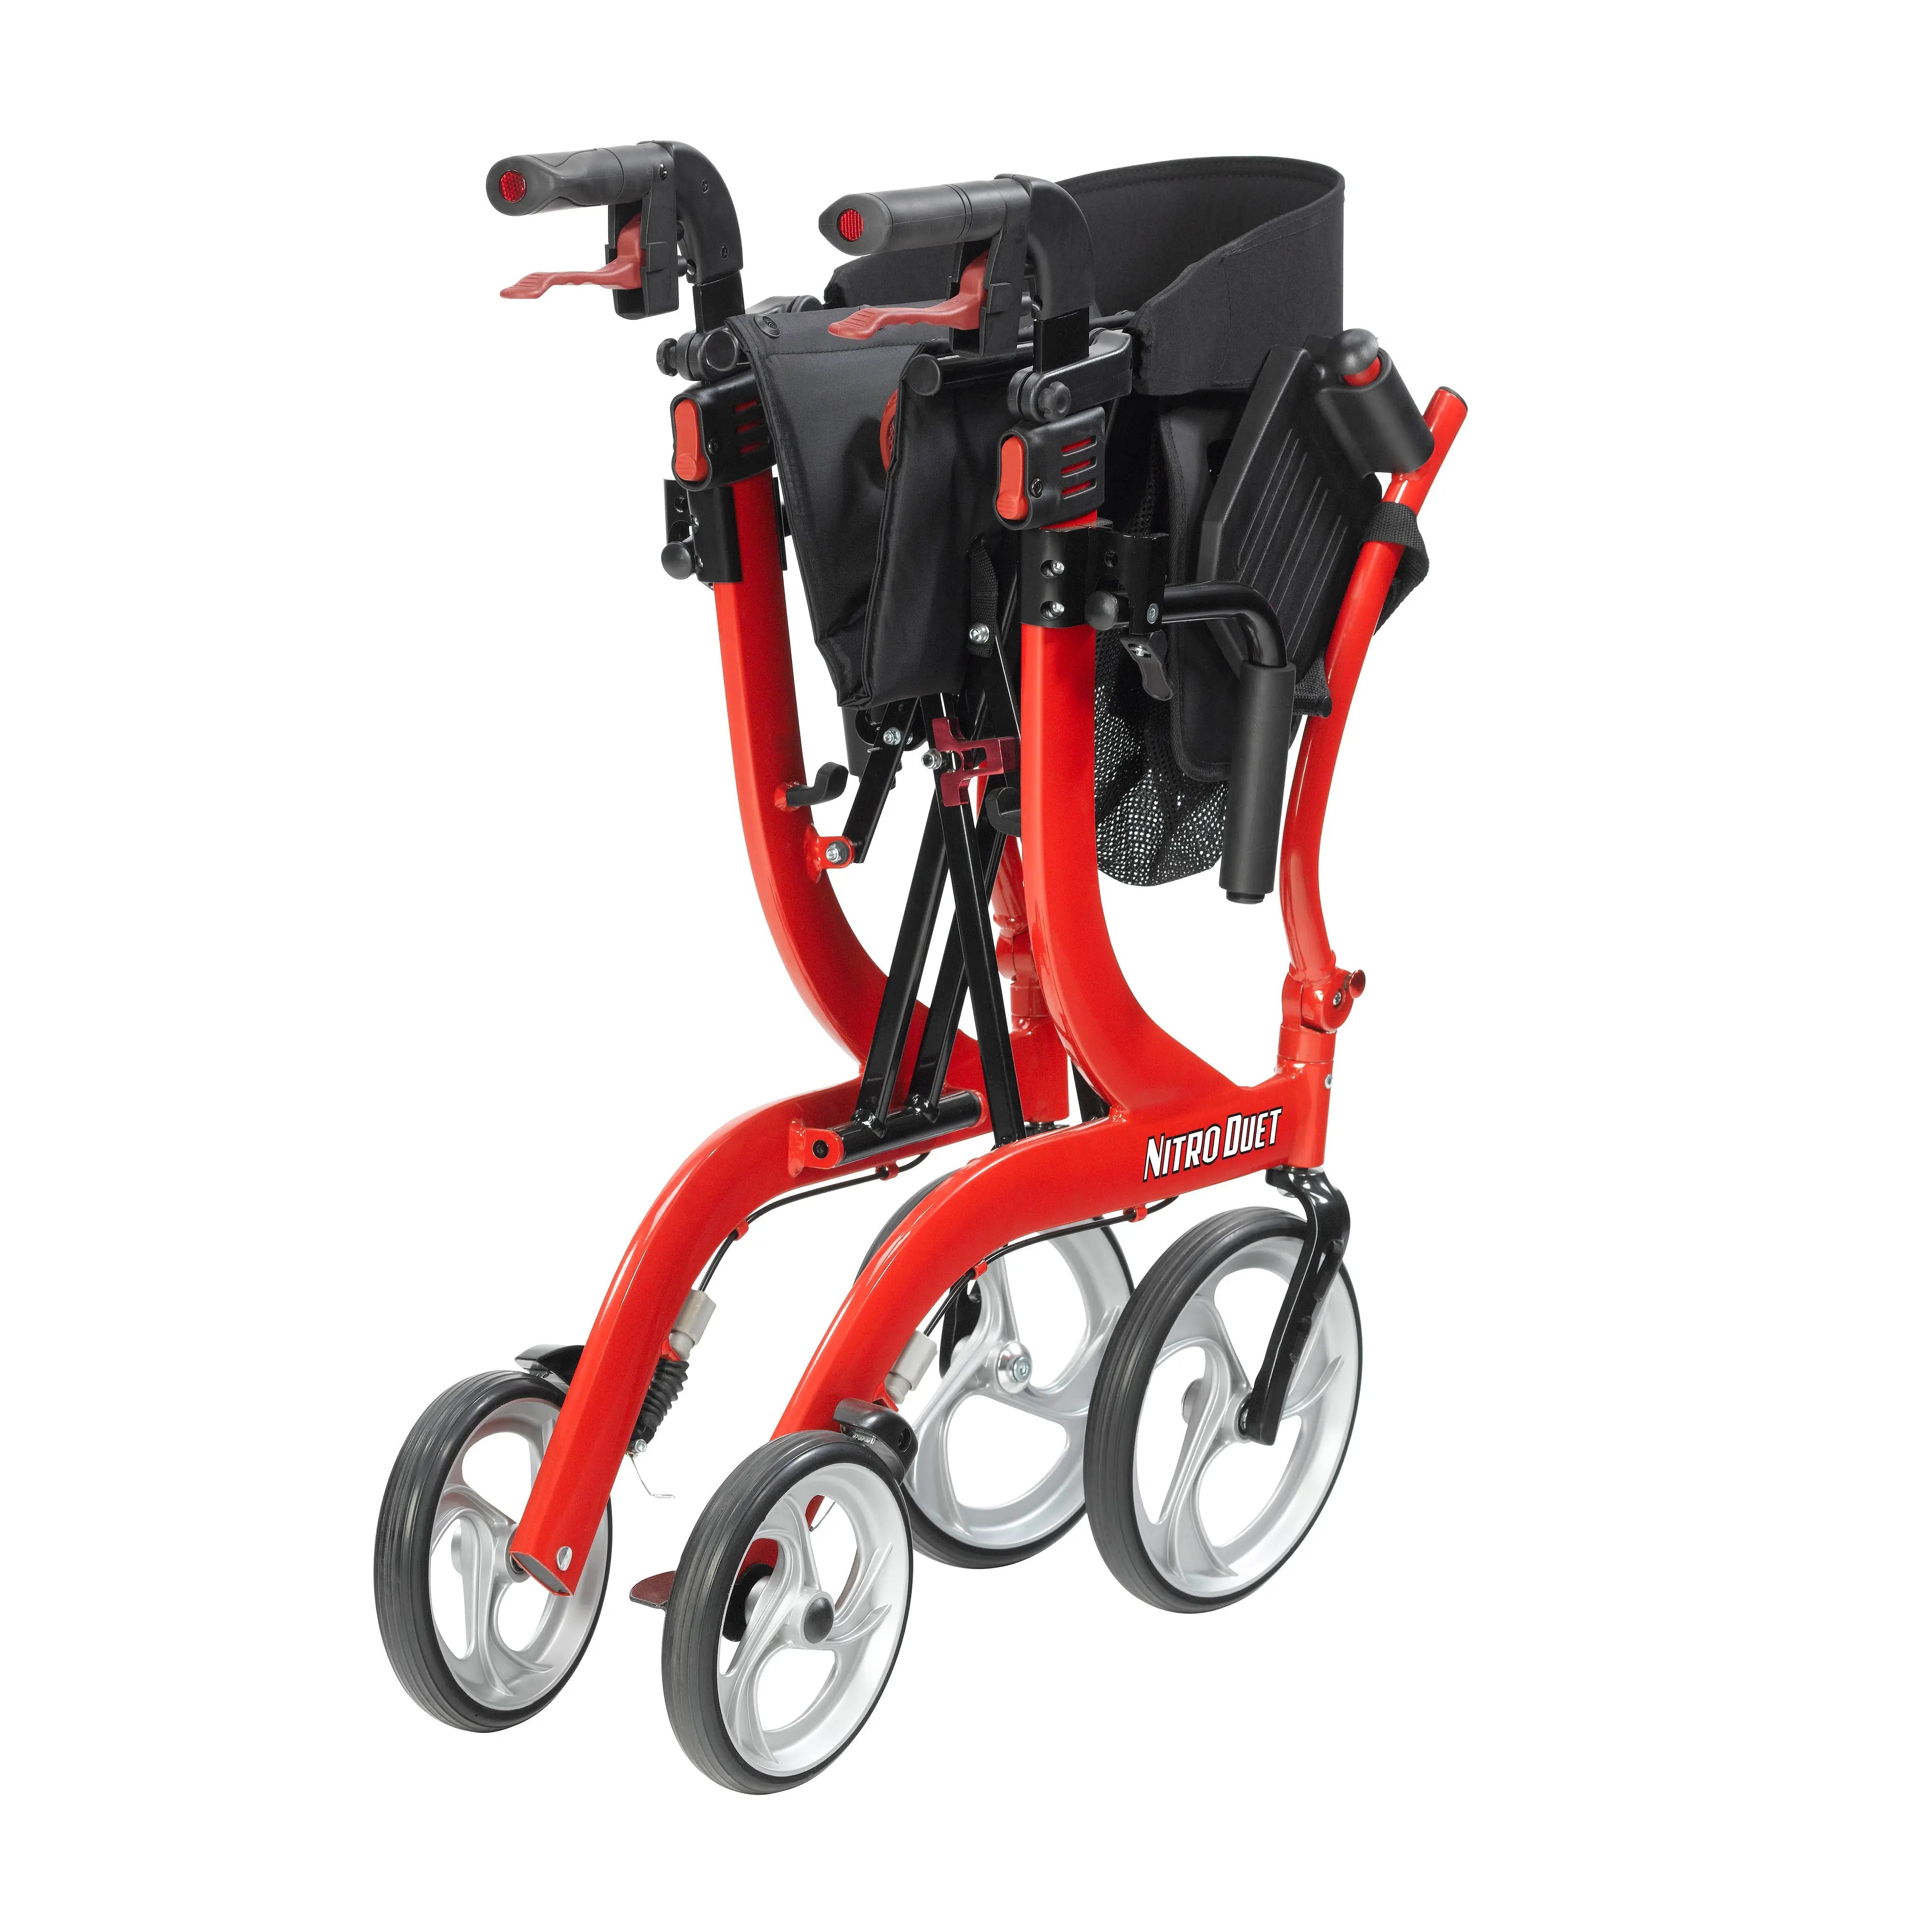 Nitro Duet Dual Function Transport Wheelchair and Rollator Rolling Walker, Red - Home Health Store Inc